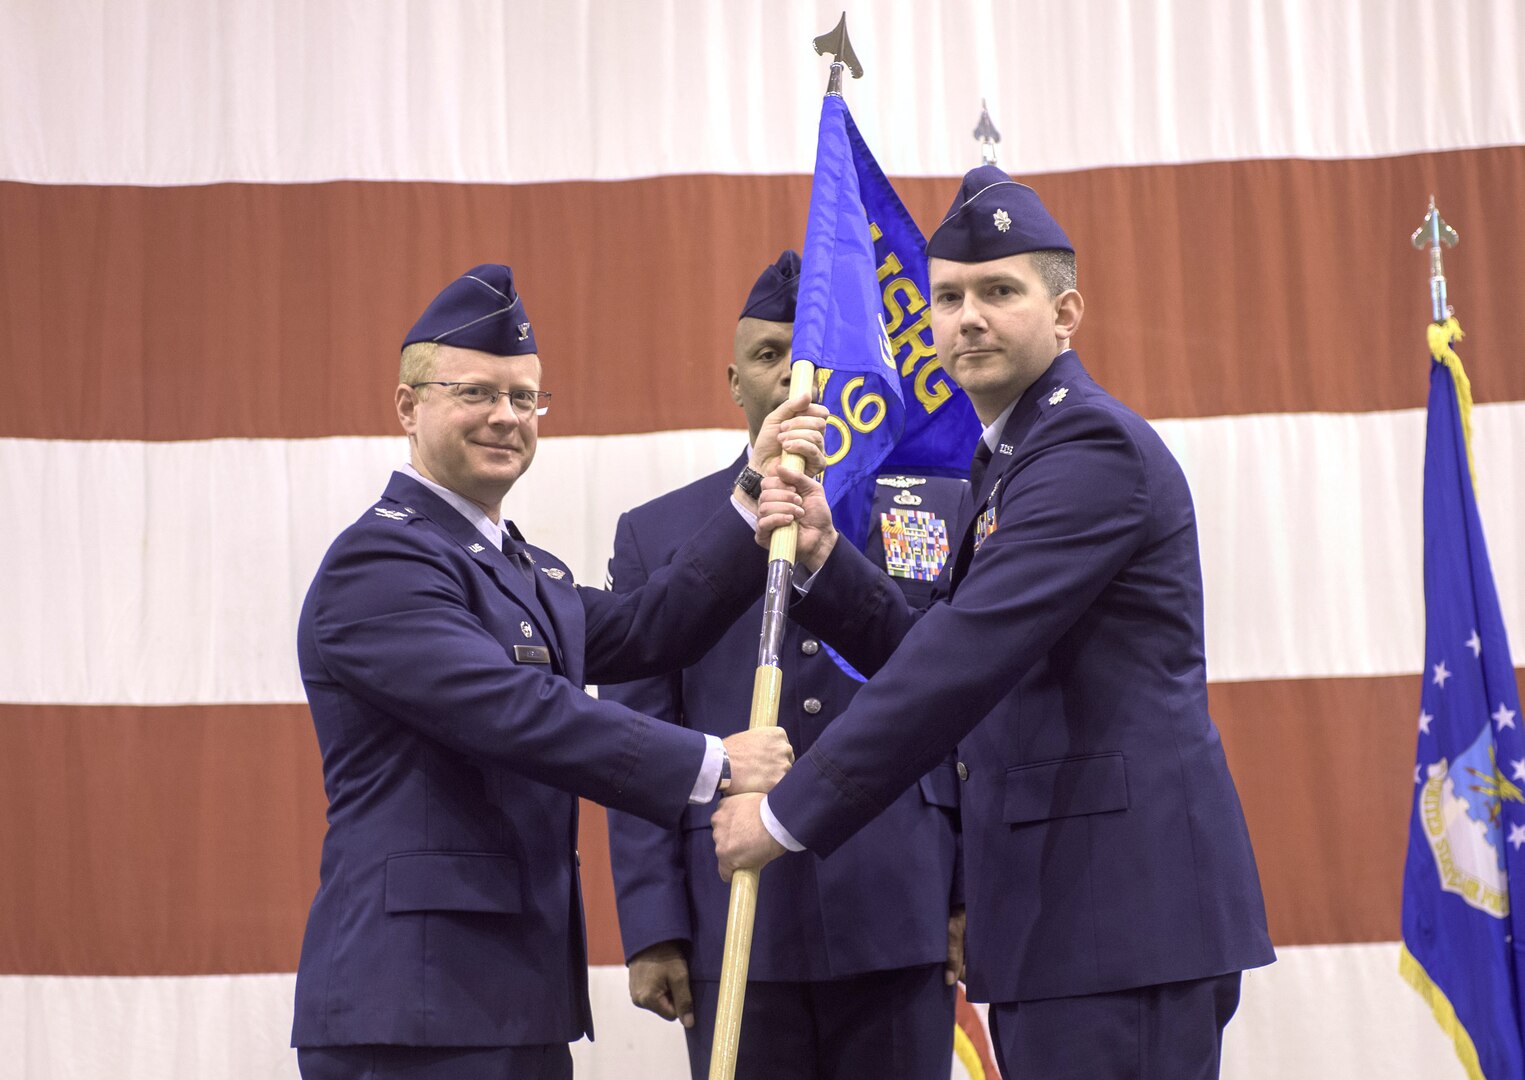 Col. Matthew Atkins, 361st Intelligence, Surveillance and Reconnaissance Group Commander, Hurlburt Field, Florida, and Lt. Col. Stephen McFadden, 306th Intelligence Squadron commander, participate in an assumption of command ceremony hosted by the 137th Special Operations Wing, March 6, 2017, at Will Rogers Air National Guard Base, Oklahoma City. Lt. Col. Stephen McFadden took command of the 306th Intelligence Squadron, formerly located at Beale Air Force Base, California, upon its activation at WRANGB. (U.S. Air National Guard photo by Staff Sgt. Kasey Phipps)